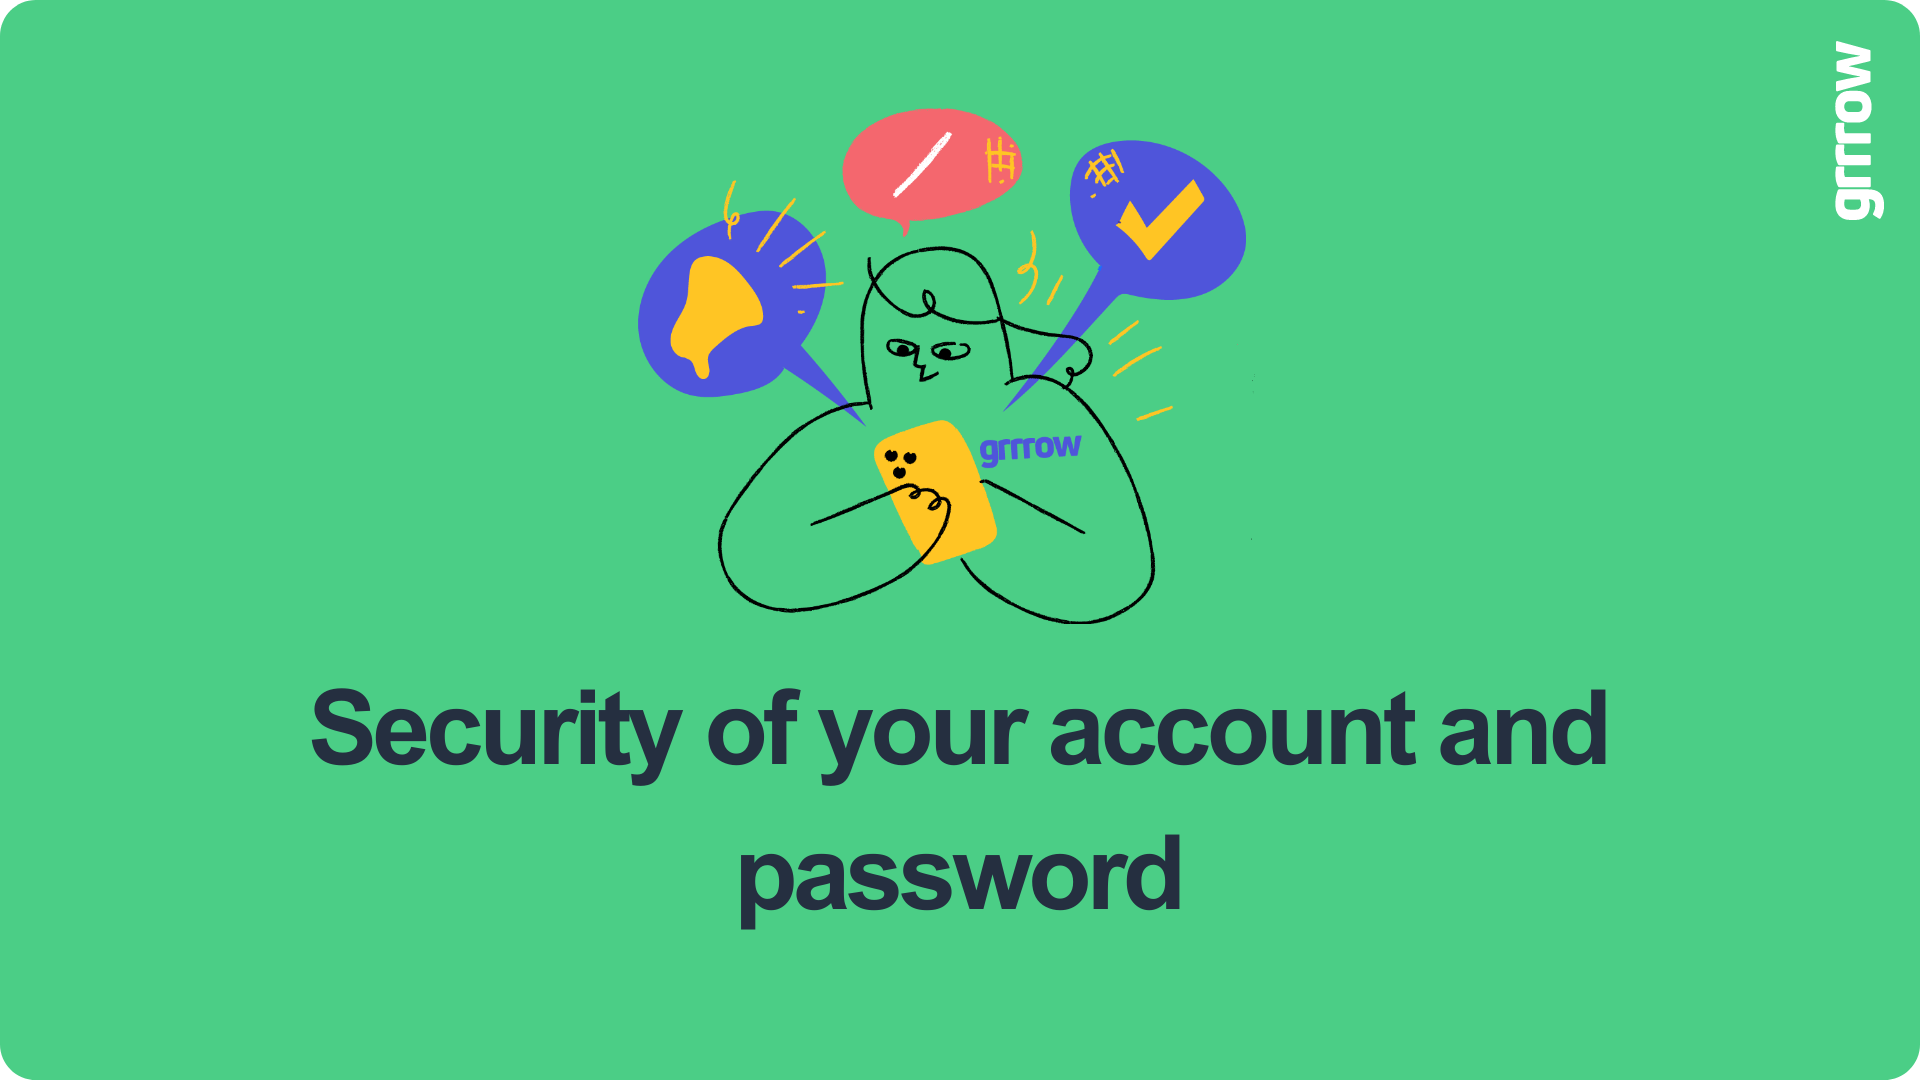 Security of your Grrrow account and password